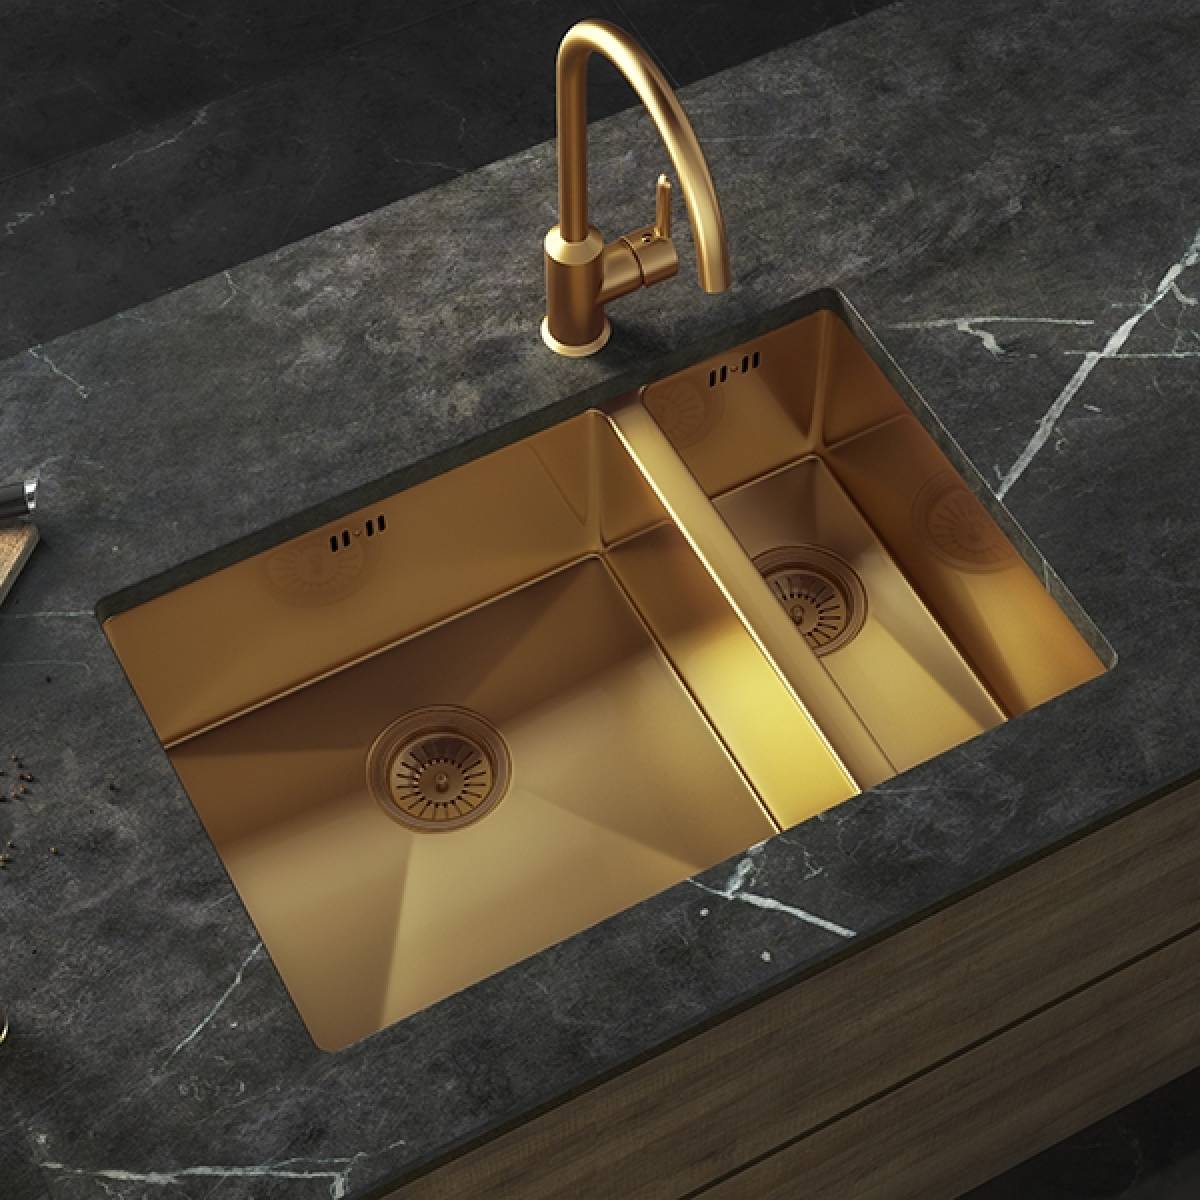 Elite 1.5 Bowl Inset or Undermounted Stainless Steel Kitchen Sink & Waste - Gold Finish (1474)